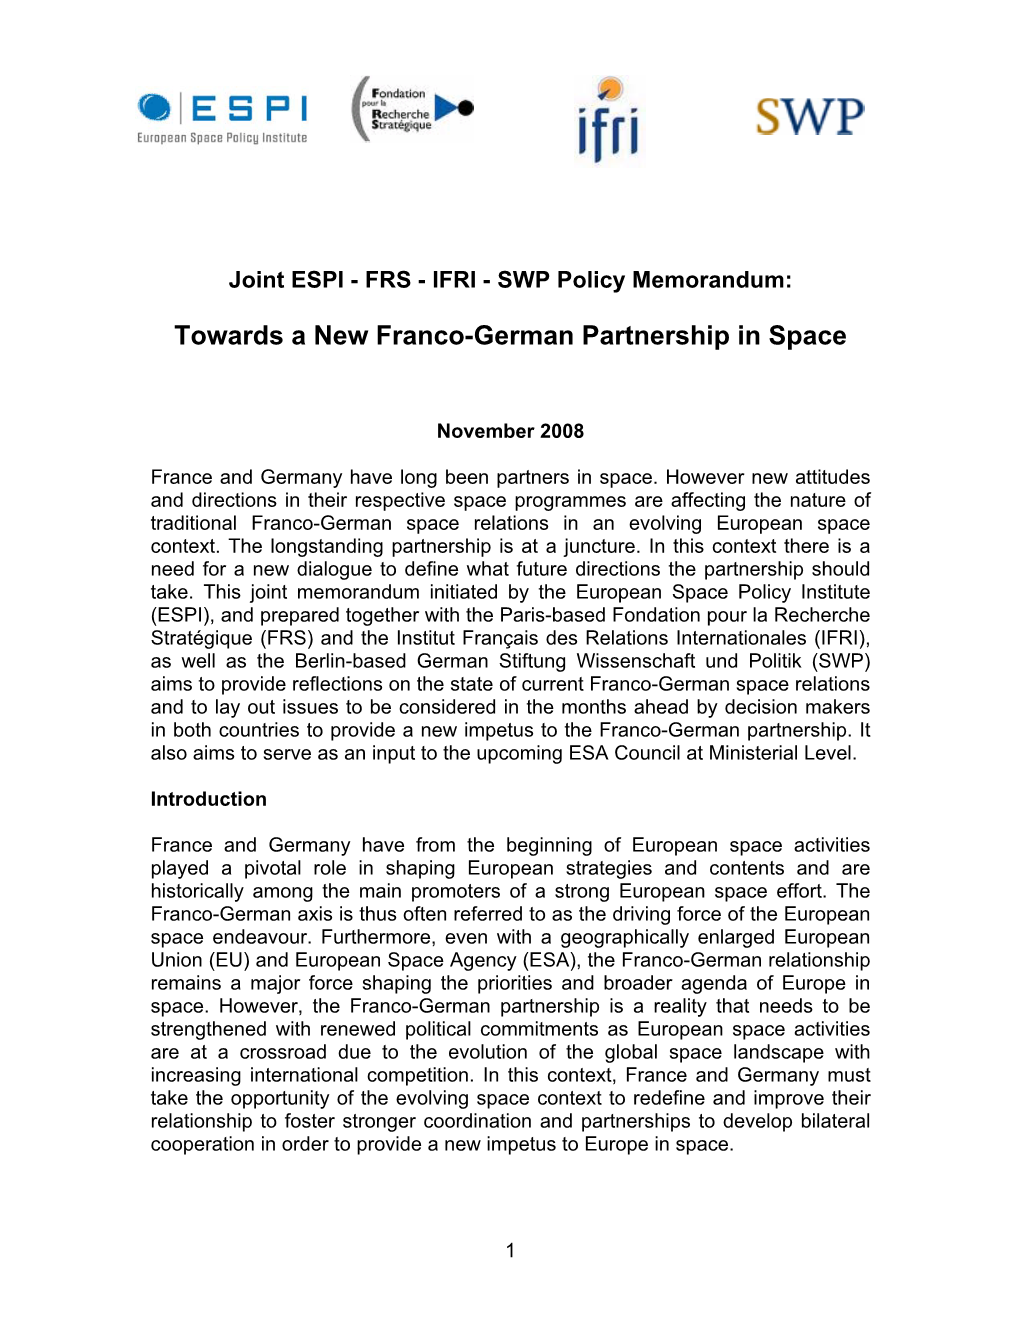 Towards a New Franco-German Partnership in Space